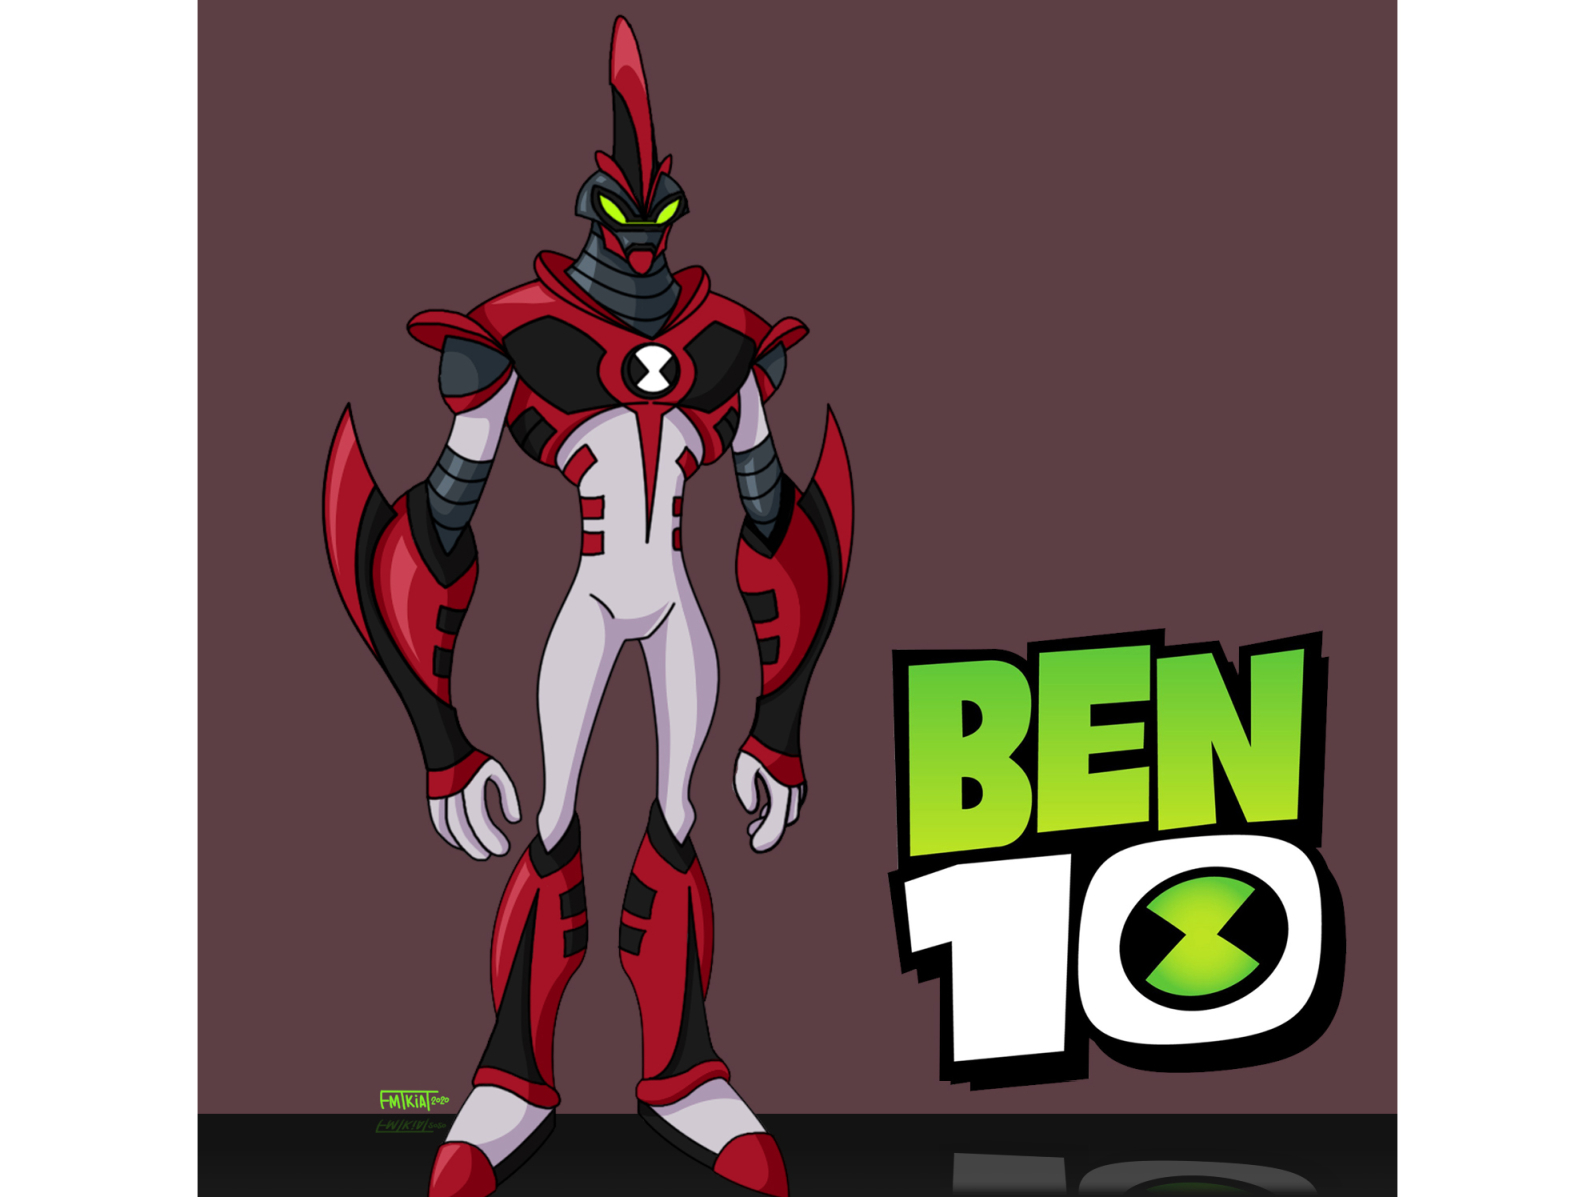 My Upgrade drawing : r/Ben10, ben 10 classico - thirstymag.com